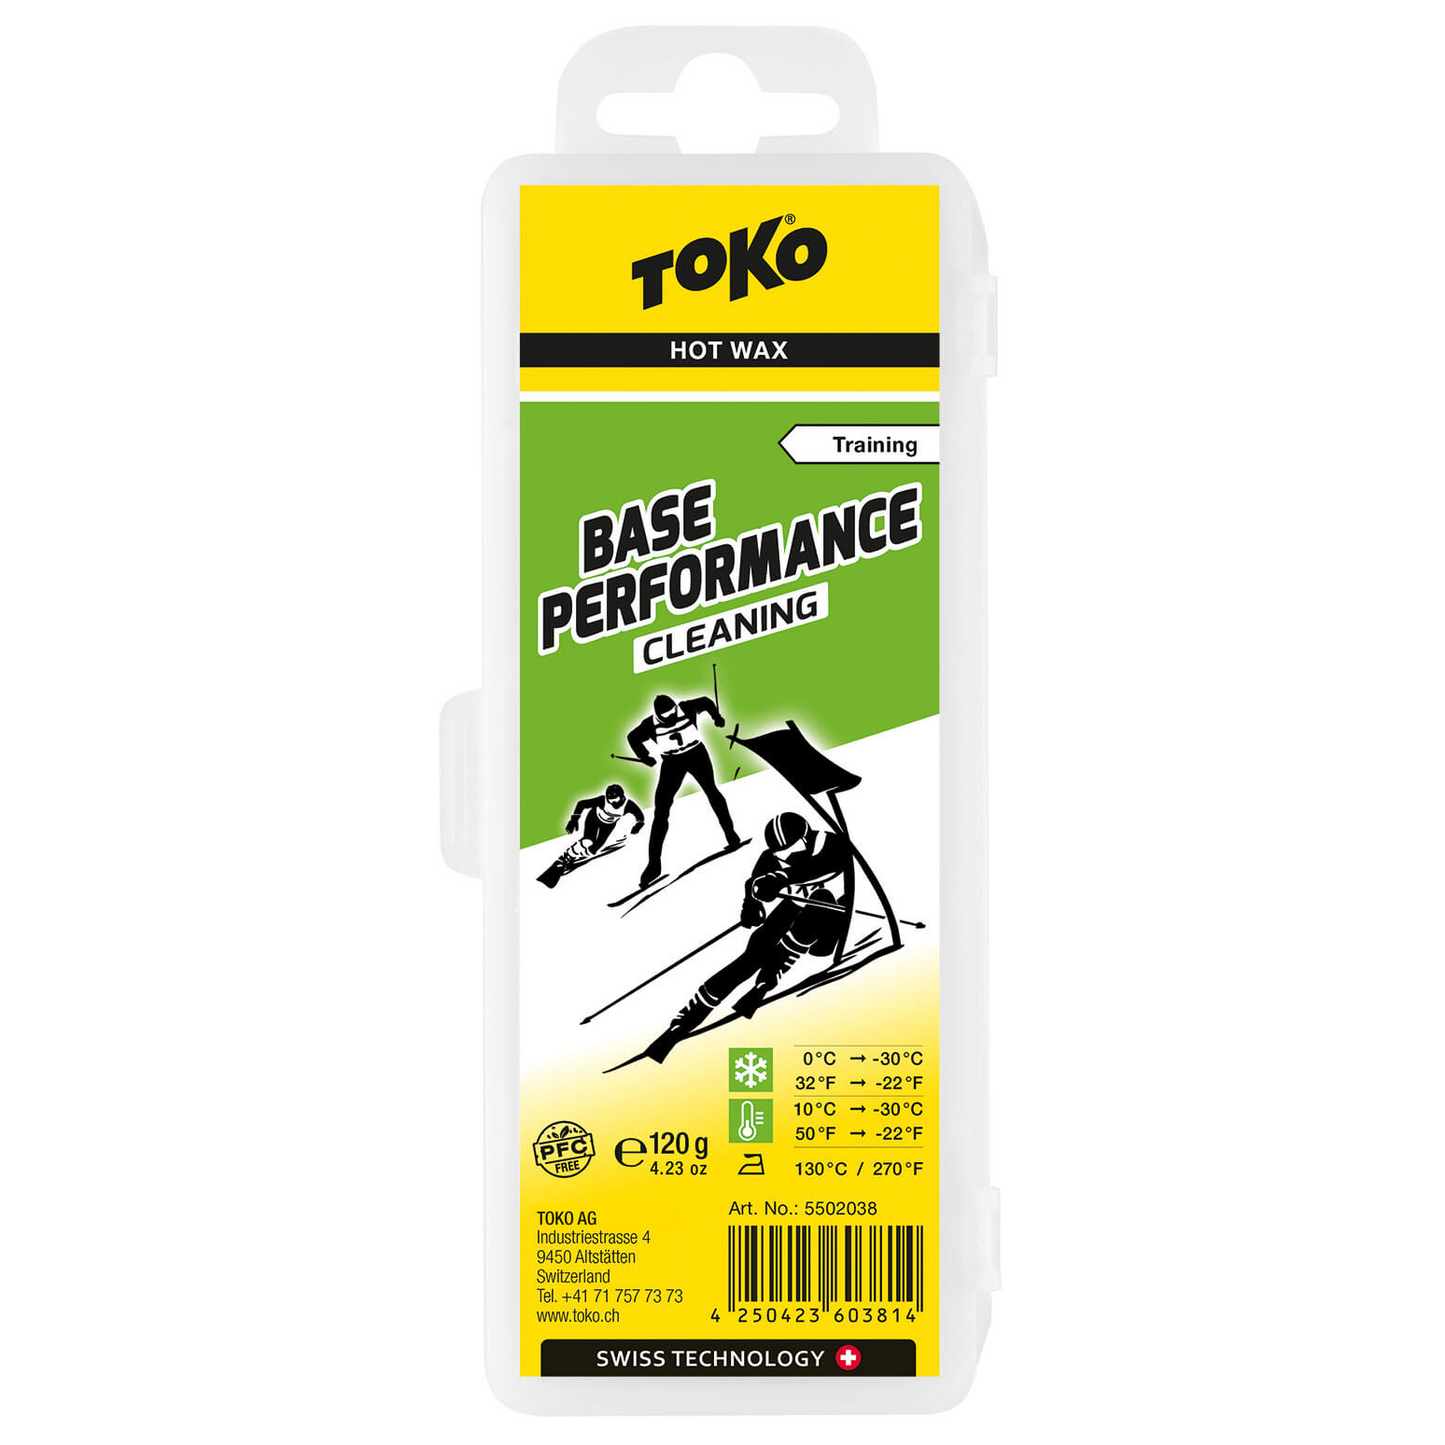 A product picture of the Toko Base Performance Cleaning Paraffin Melt Wax